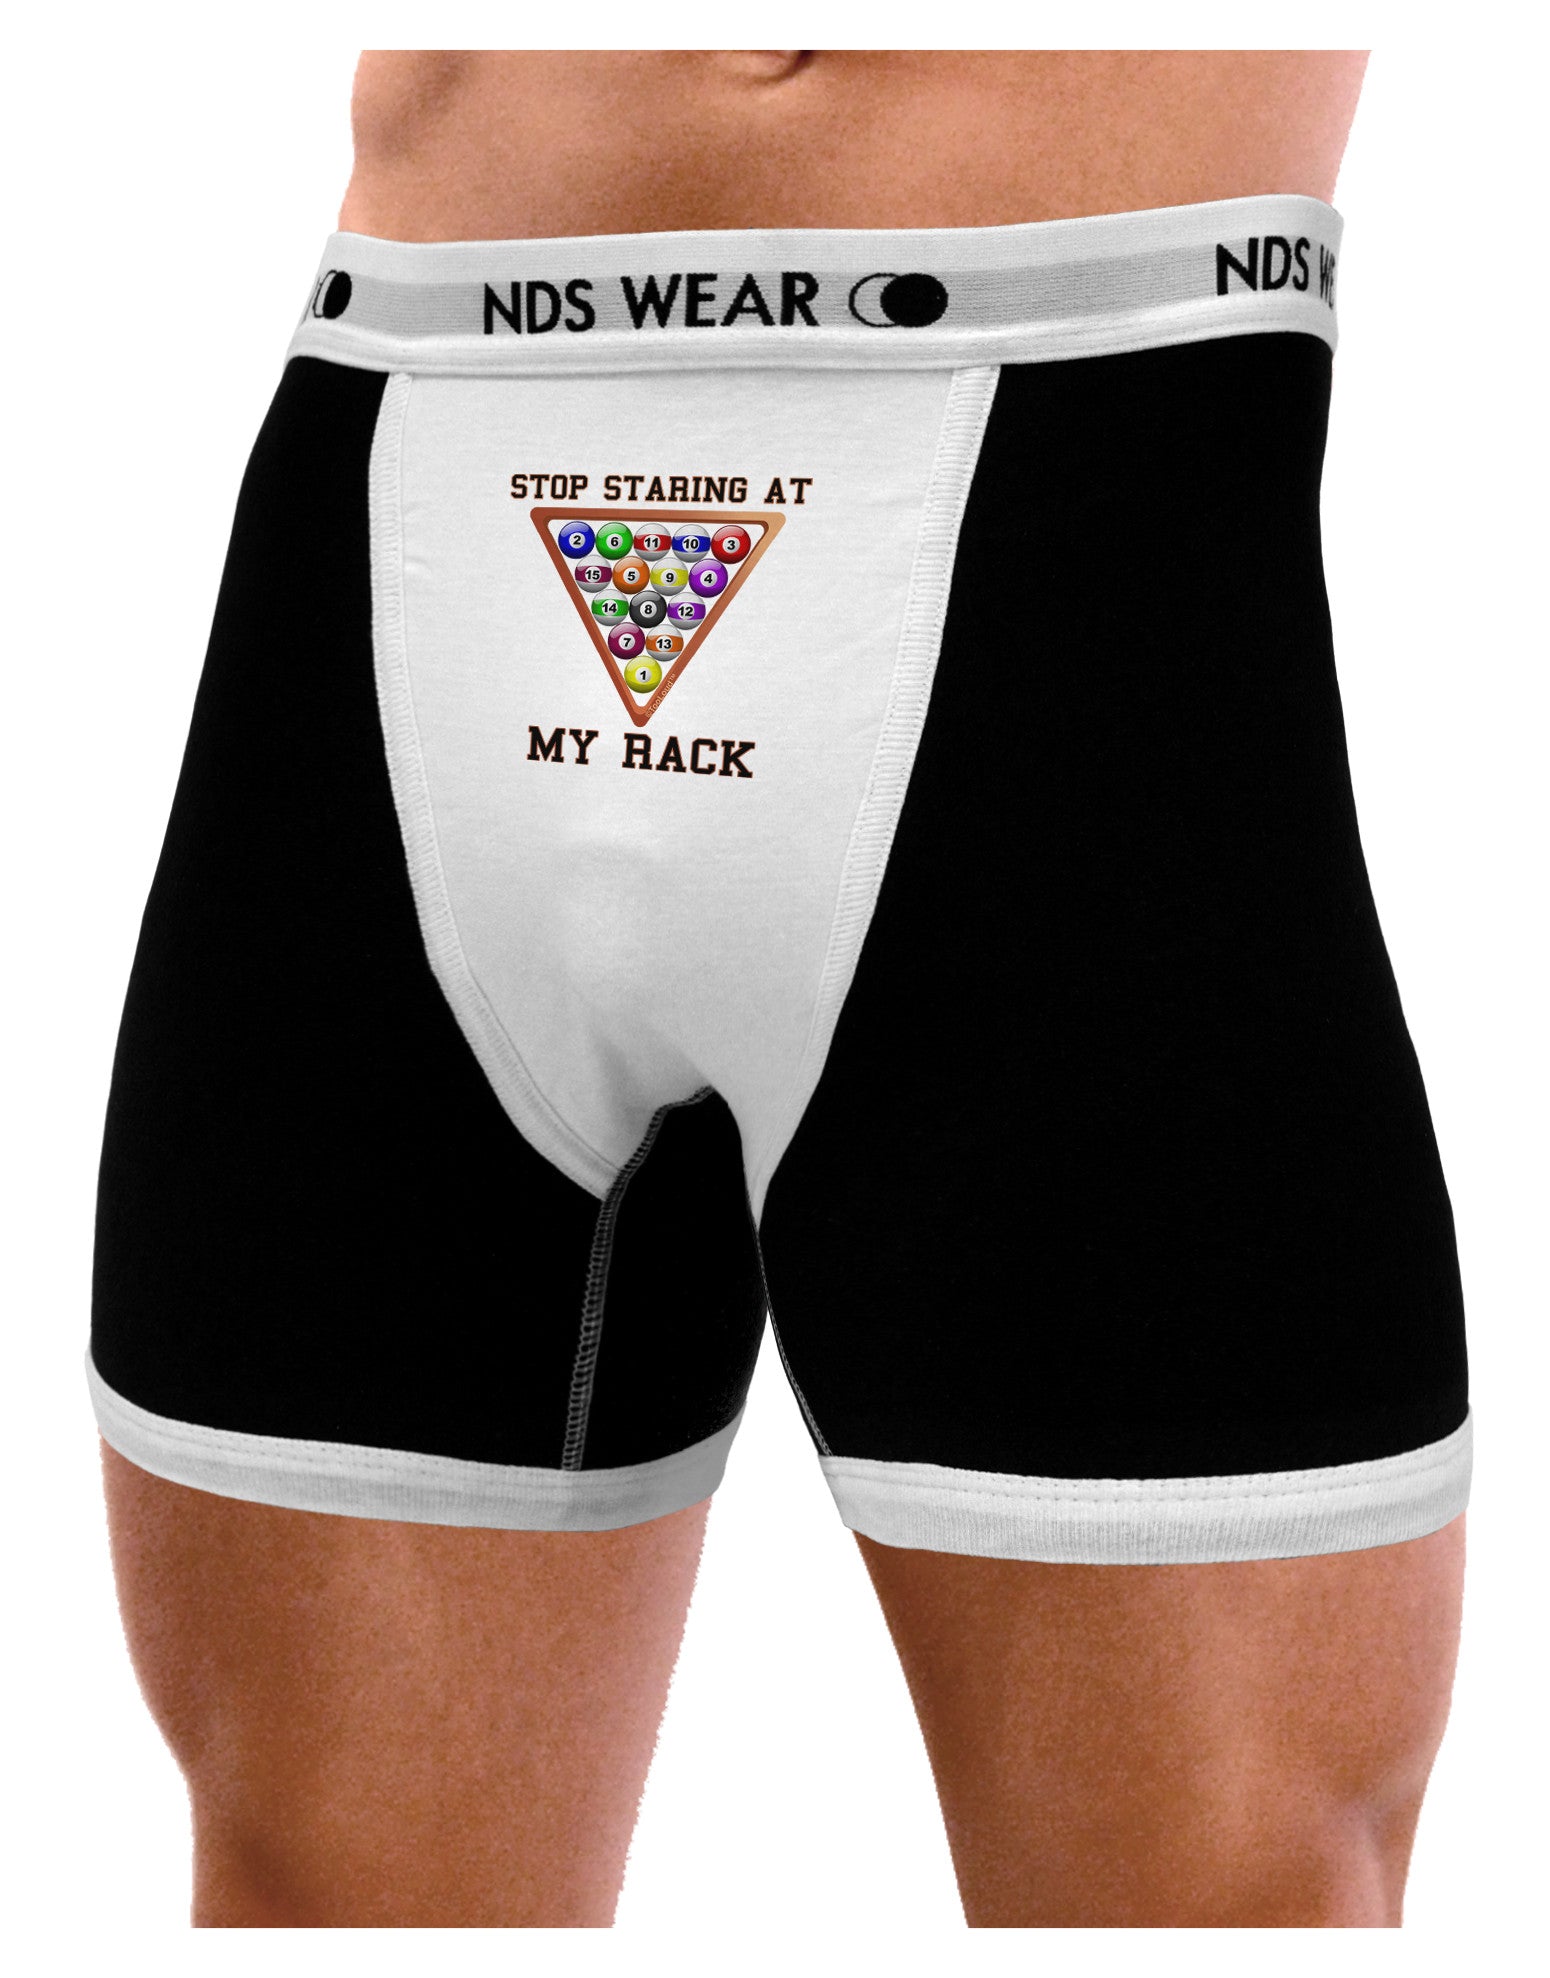 Stop Staring At My Rack - Pool Mens NDS Wear Boxer Brief Underwear